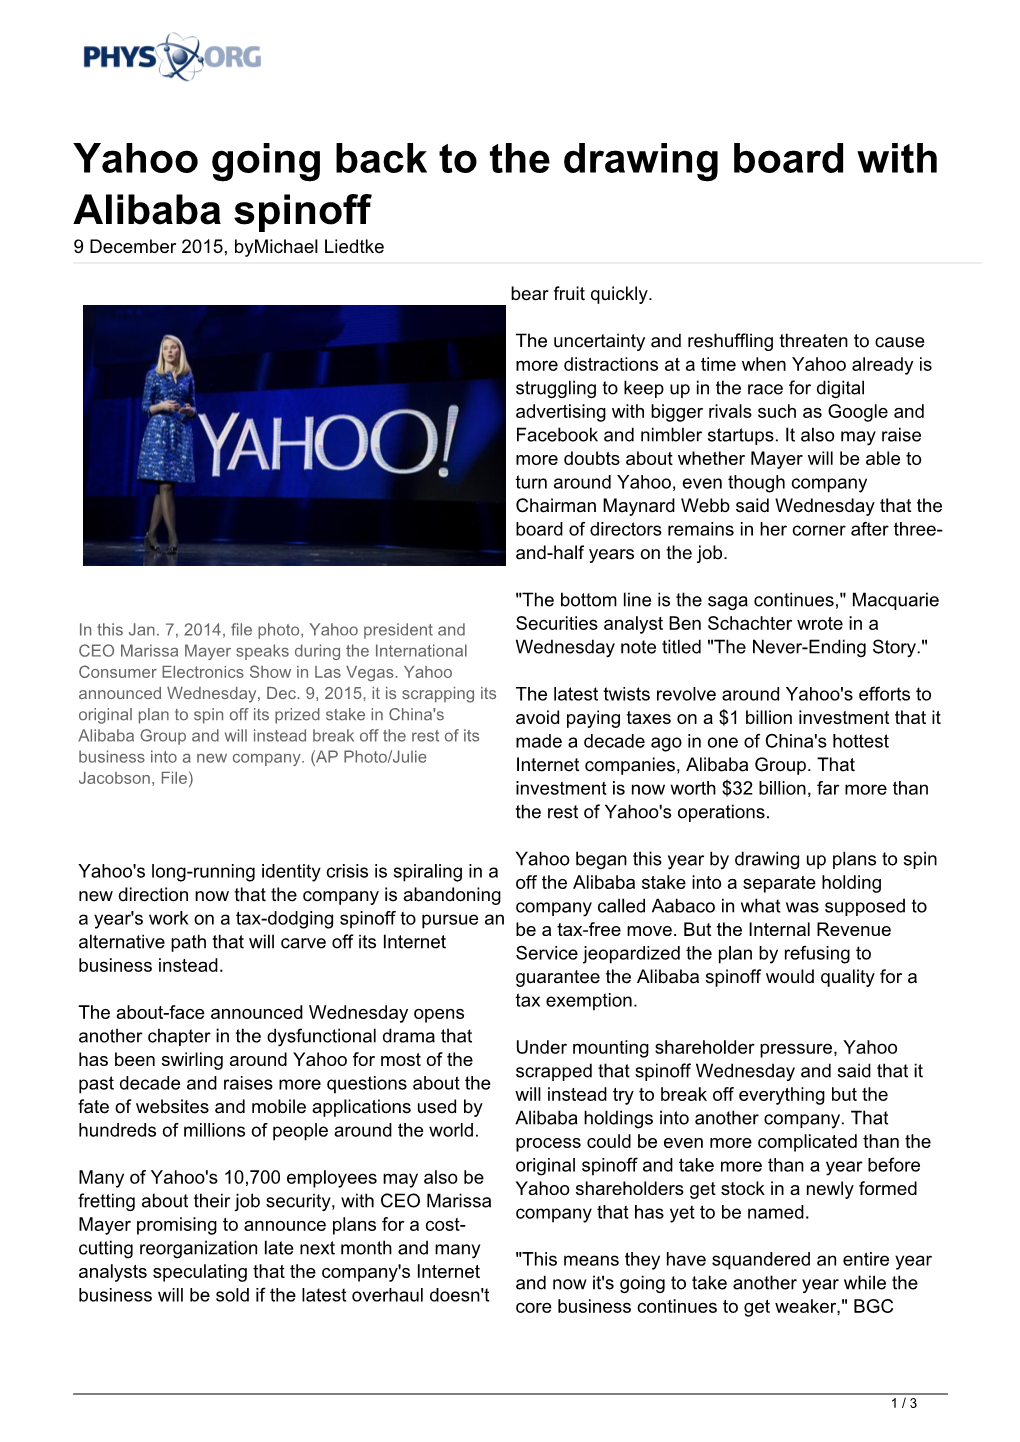 Yahoo Going Back to the Drawing Board with Alibaba Spinoff 9 December 2015, Bymichael Liedtke